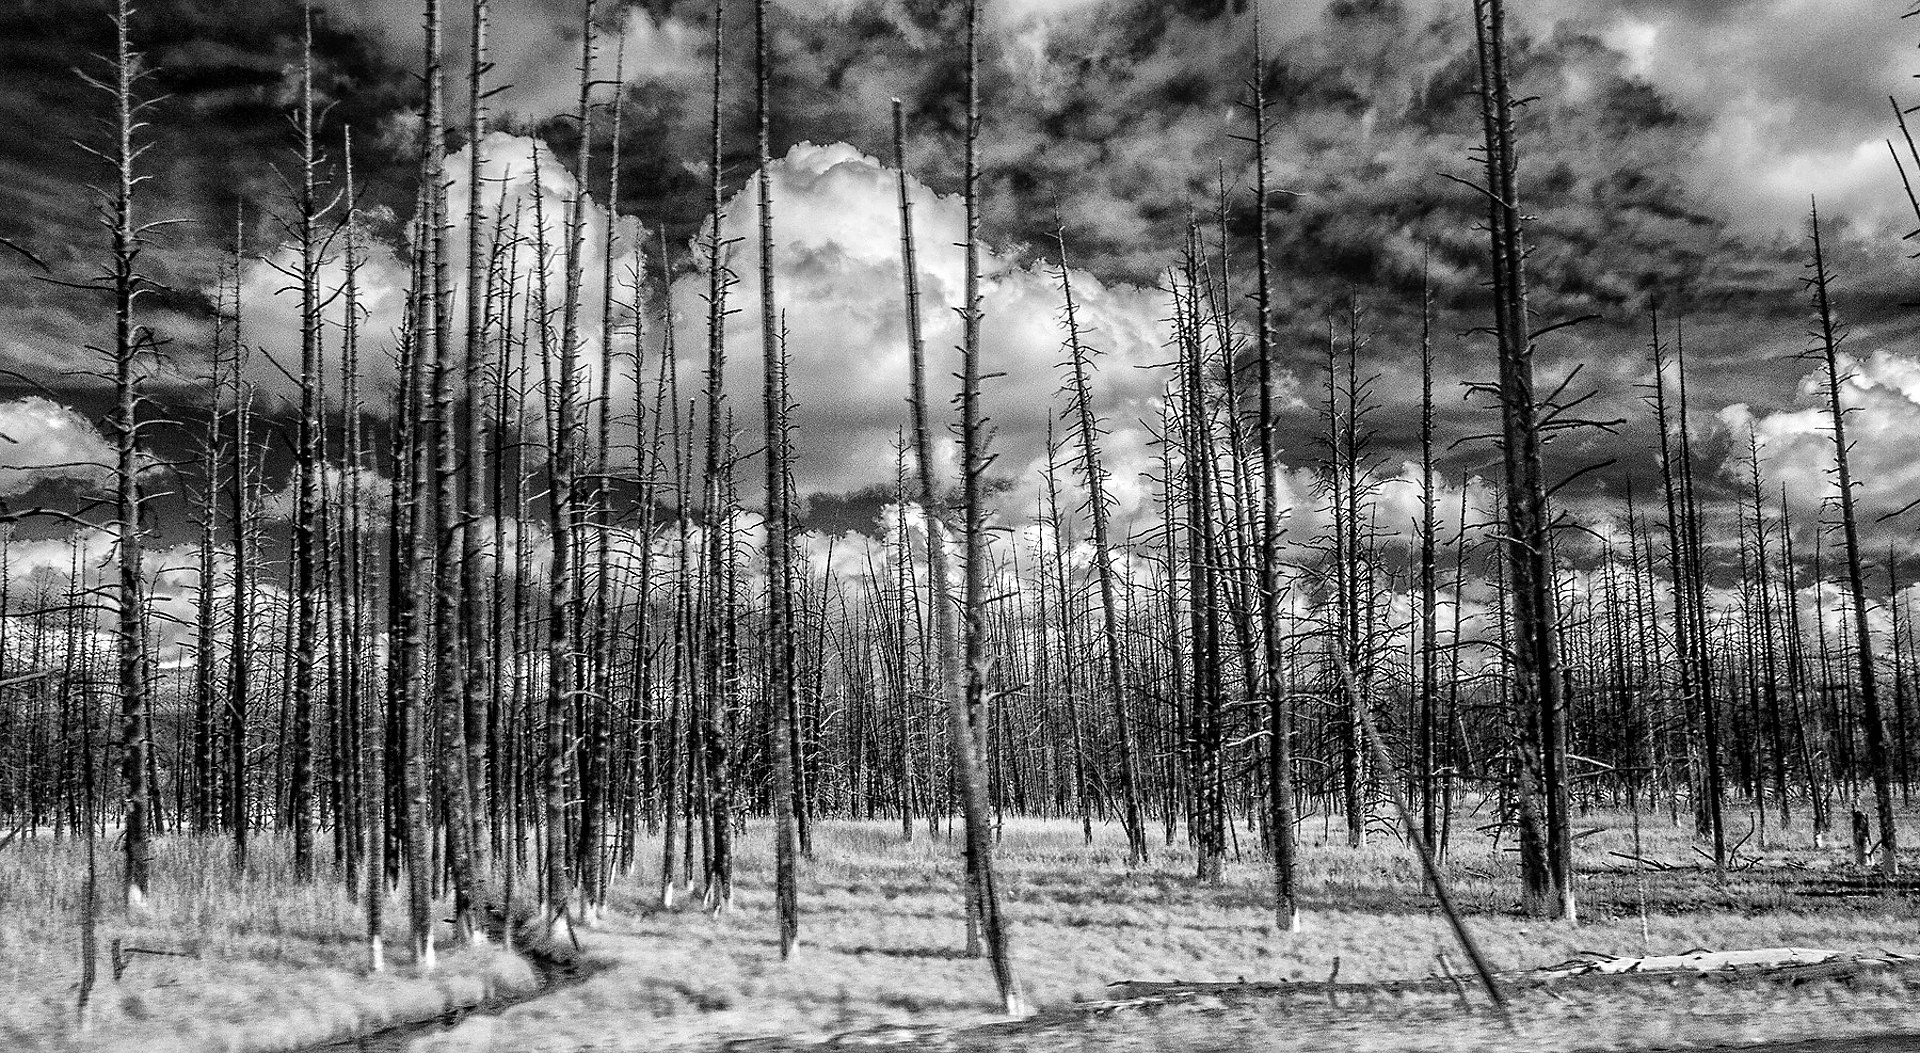 Burnt Forest, Yellowstone Park, 2014